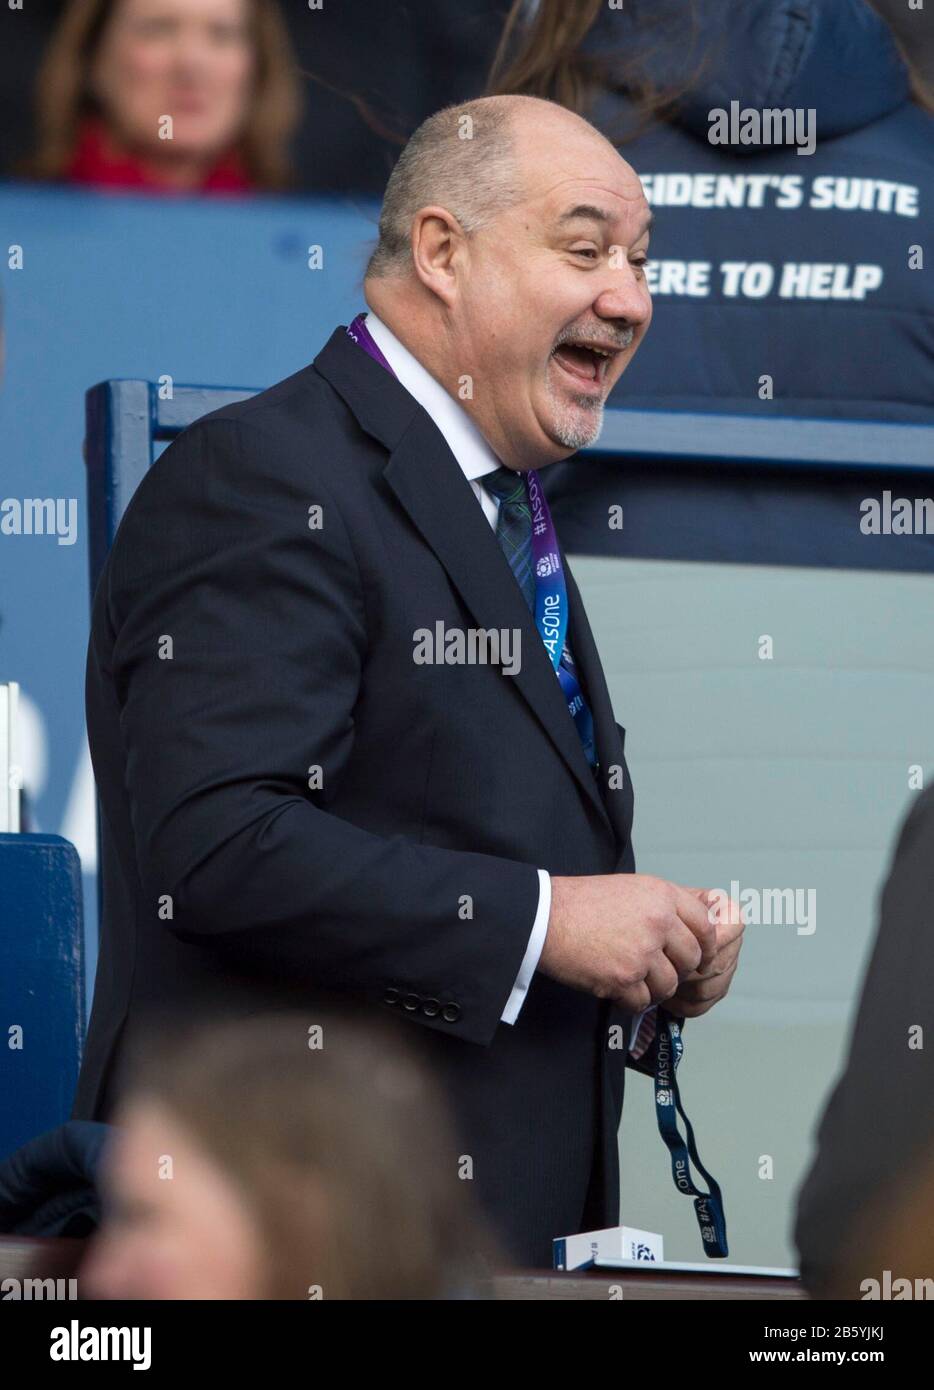 Guinness Six Nations Test: Scotland v France, BT Murrayfield Stadium, Edinburgh, Scotland, UK. 8th March, 2020. Scottish Rugby Union chief executive Mark Dodson in the Royal Box before the match.  Credit: Ian Rutherford/Alamy Live News. Stock Photo